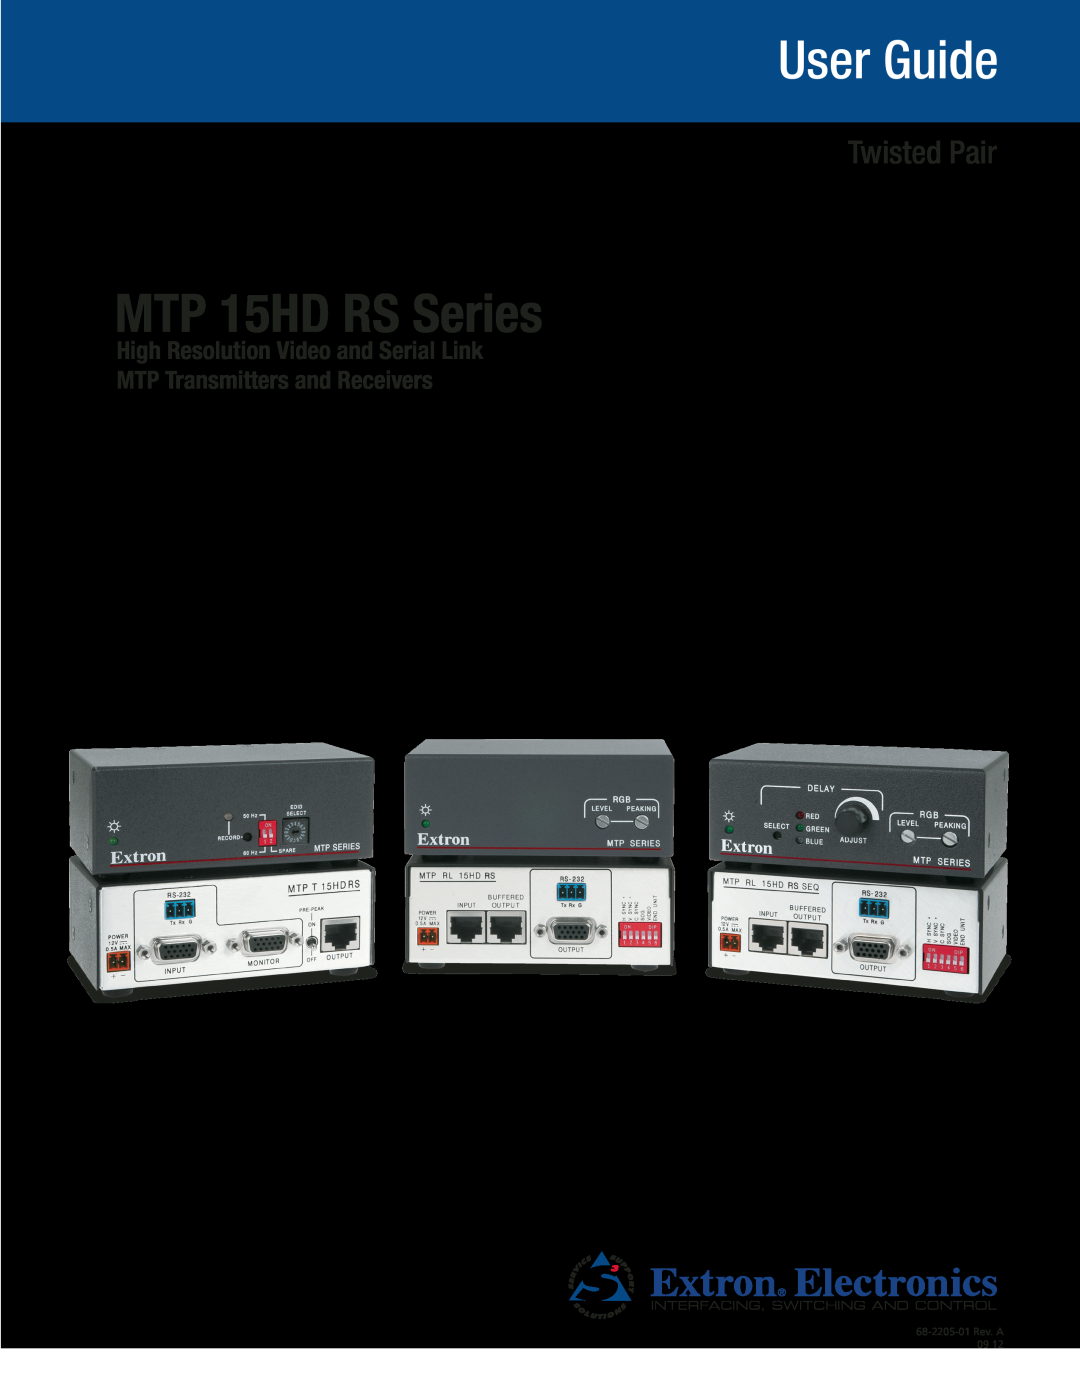 Extron electronic manual User Guide, MTP 15HD RS Series, Twisted Pair, High Resolution Video and Serial Link 